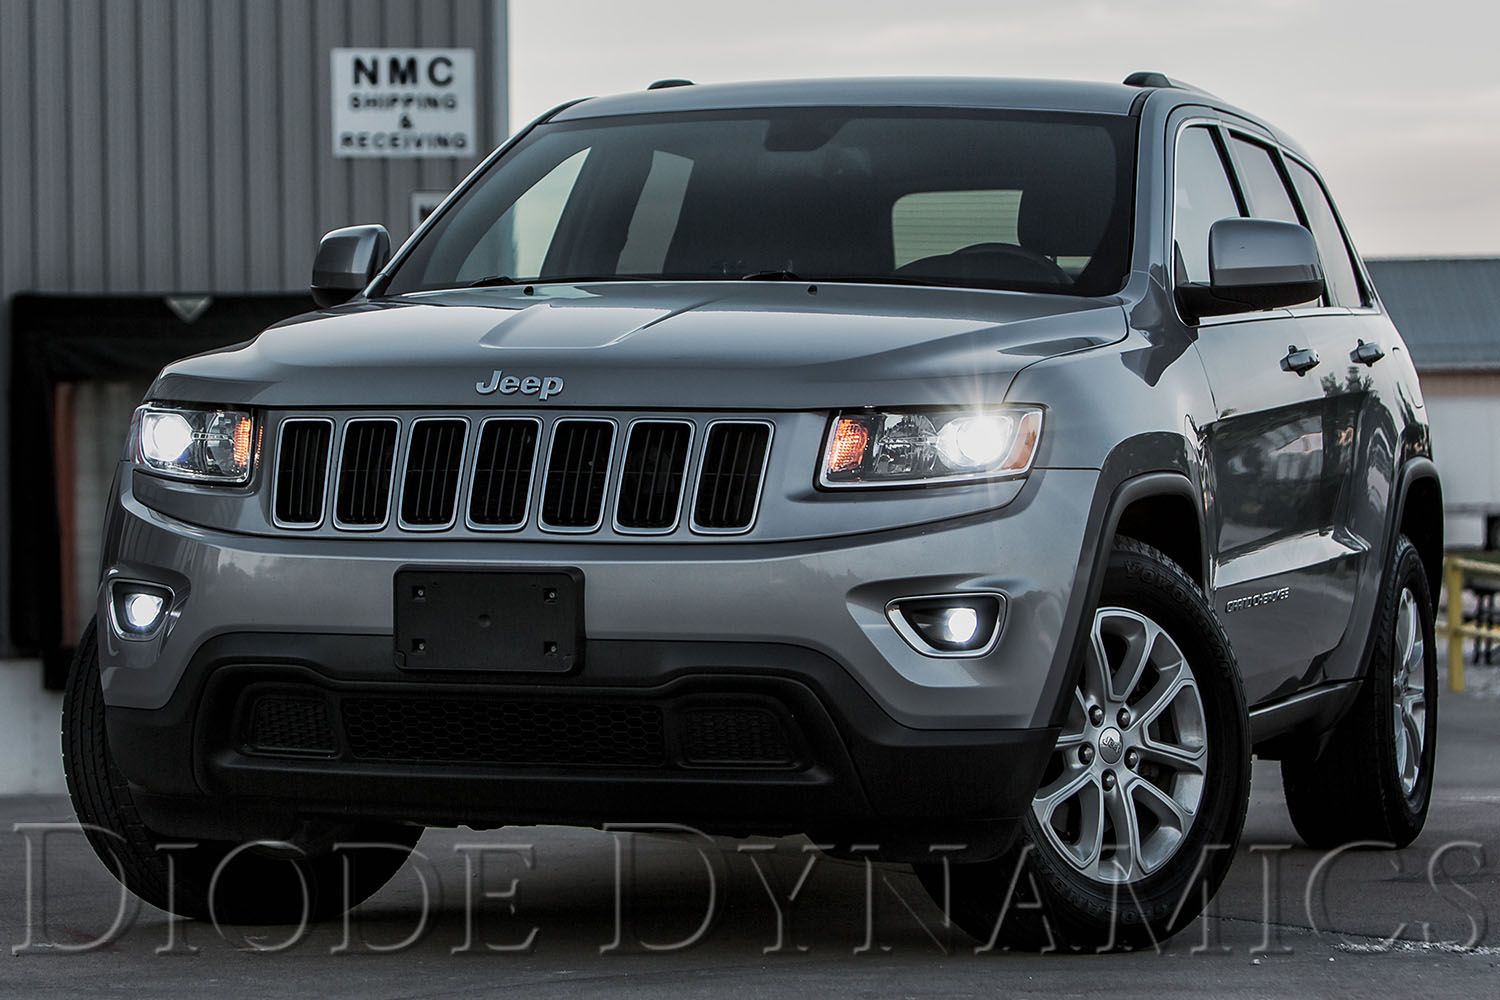 Top LED Lighting Upgrades for the 2014-2020 Jeep Grand Cherokee